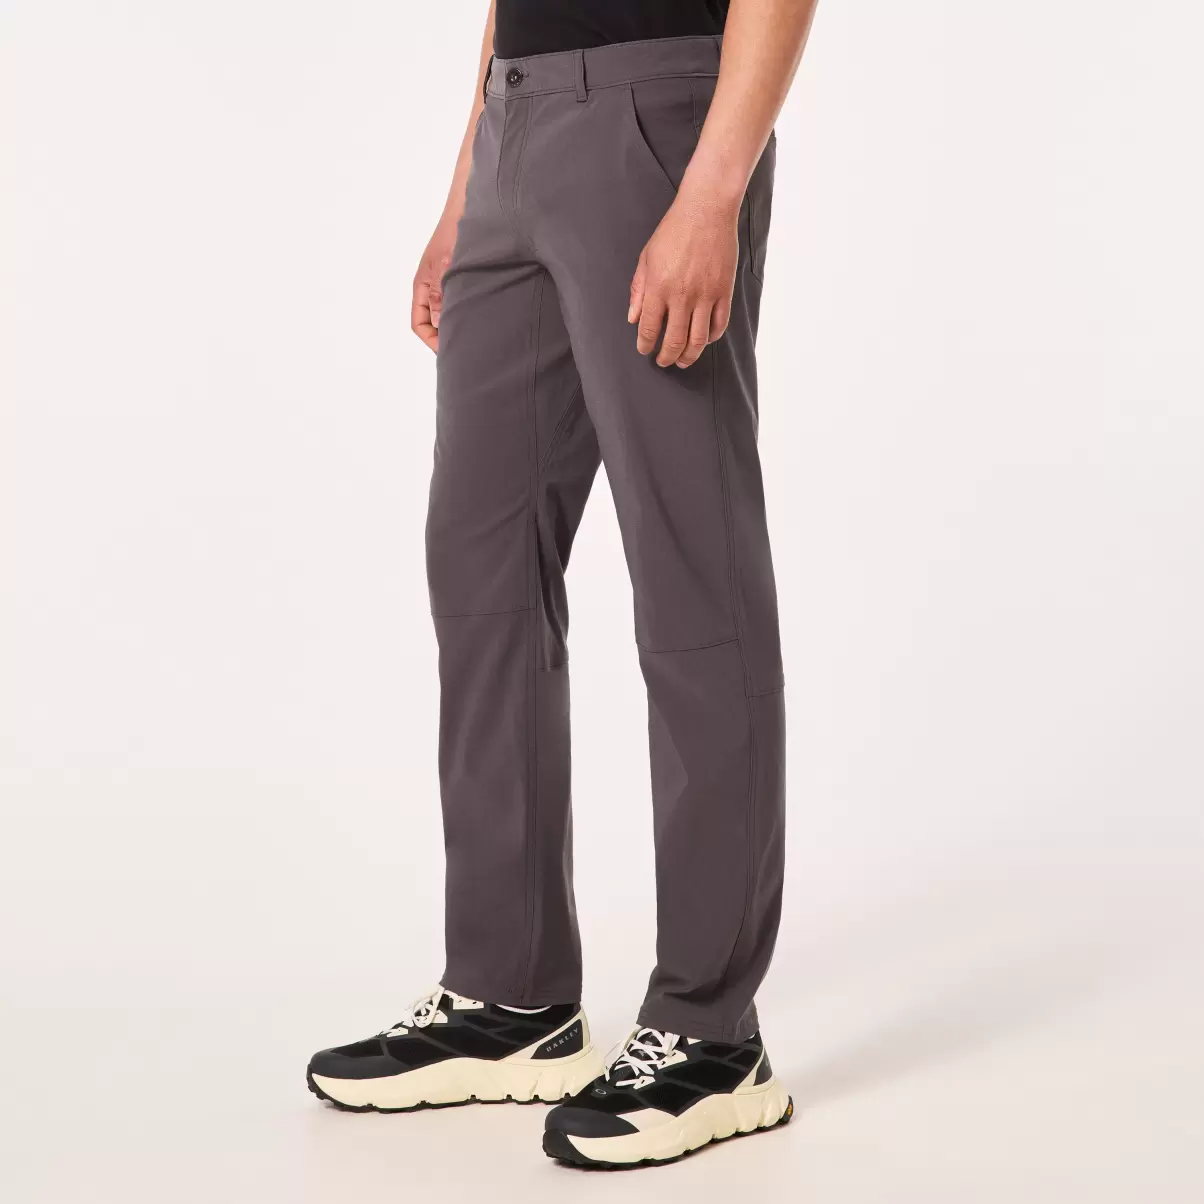 Men Oakley Perf 5 Utility Pant 2.0 Pants Forged Iron - 1